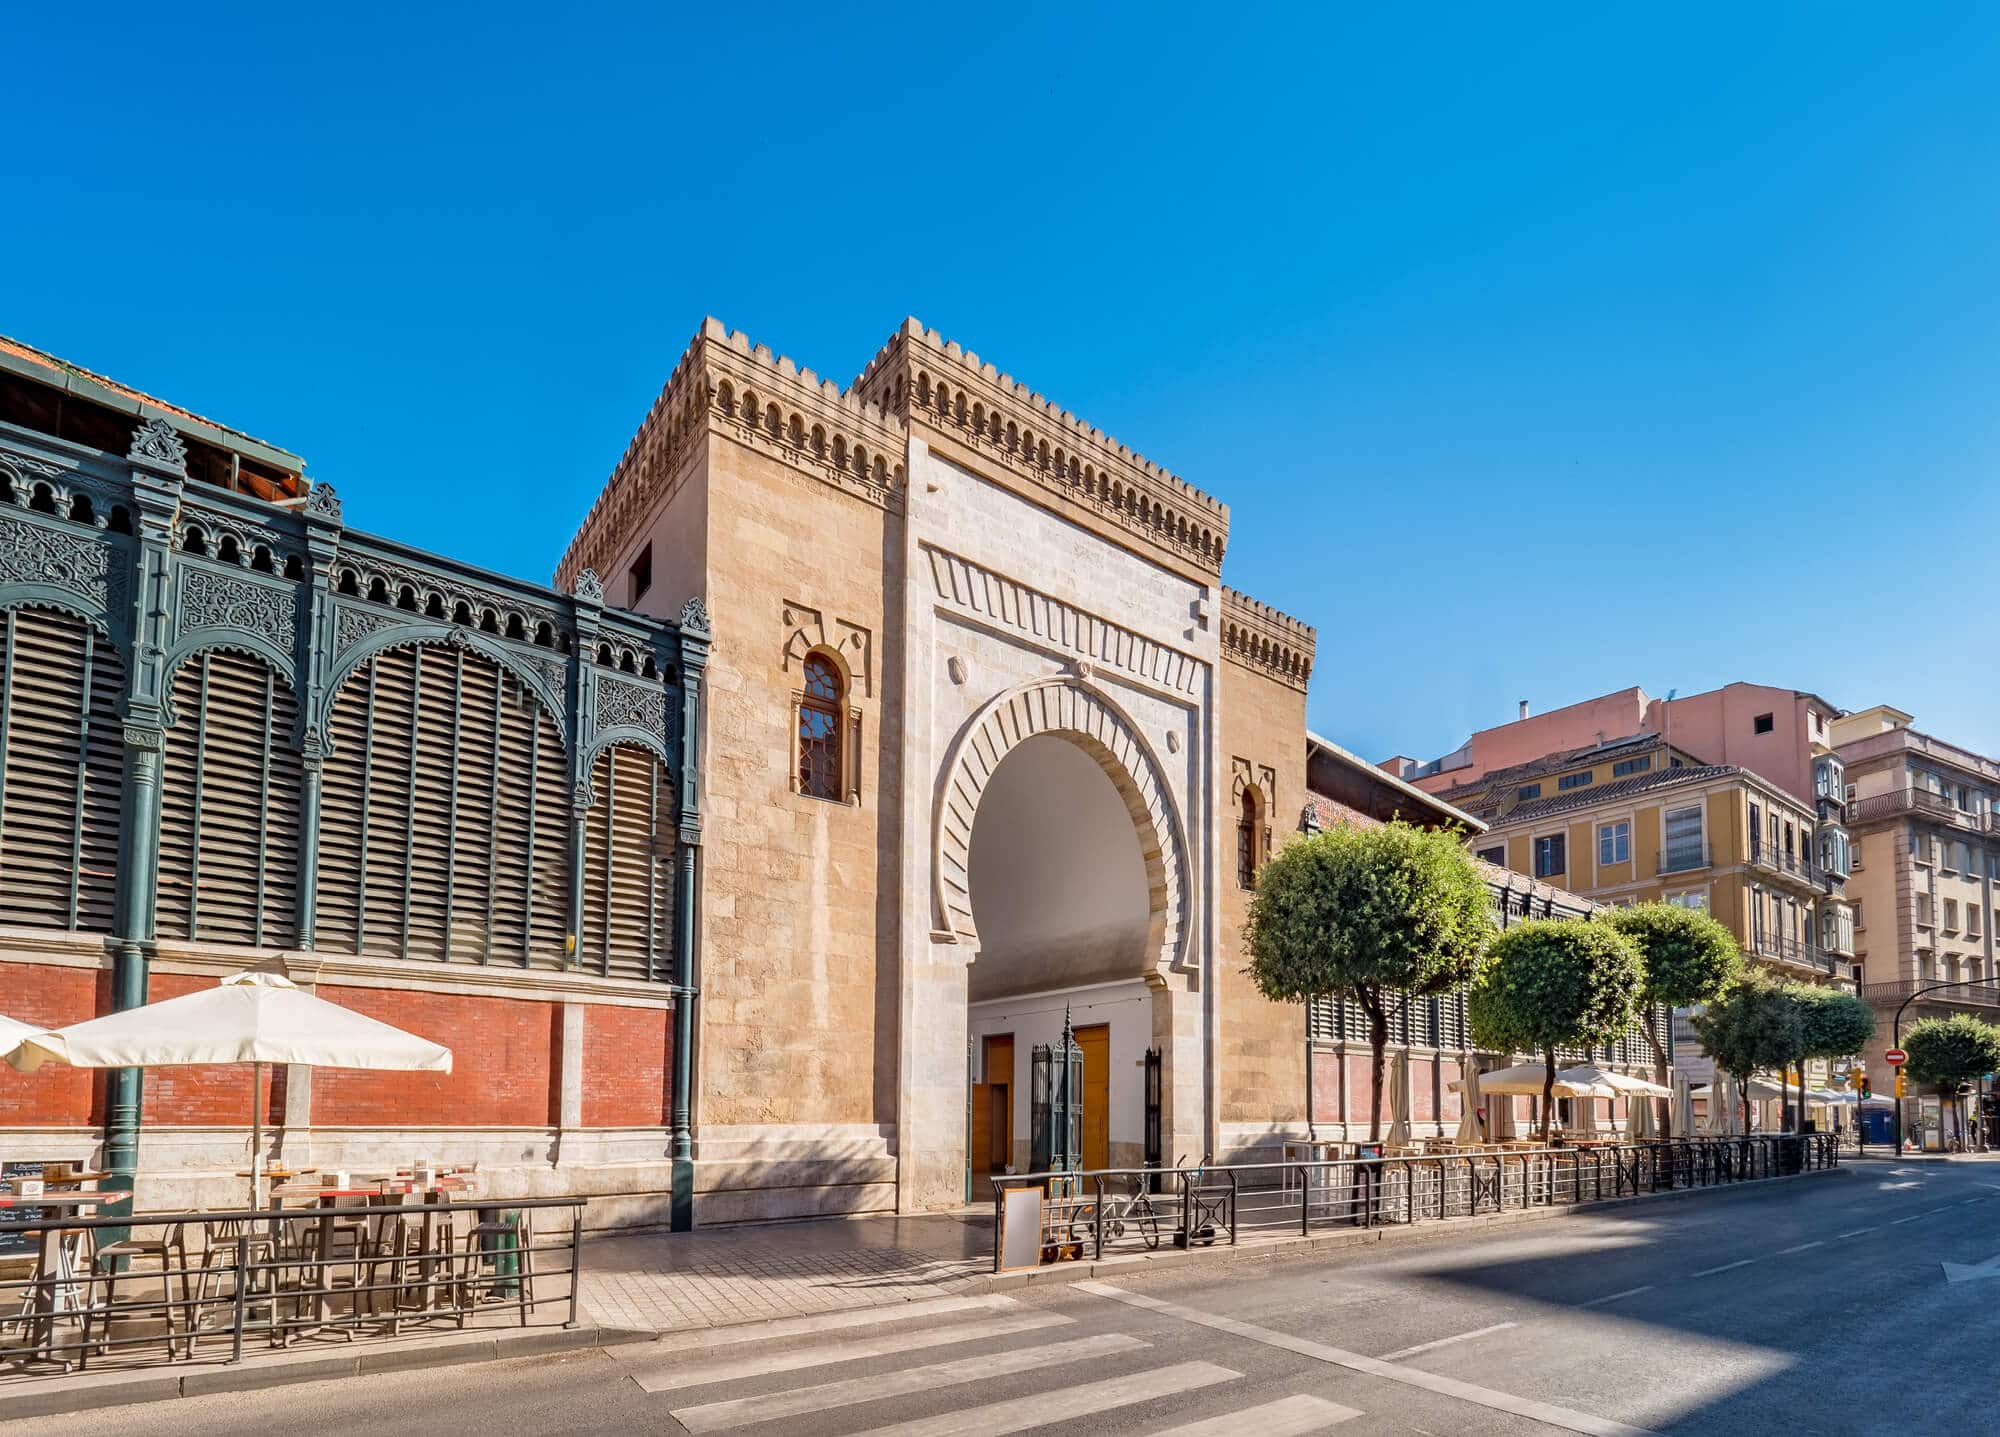 The entrance arch to Atarazanas Market in Malaga Old Toen built from sandstone in a Moorish style, with a black iron fence to both sides and manicured round trees to the right.